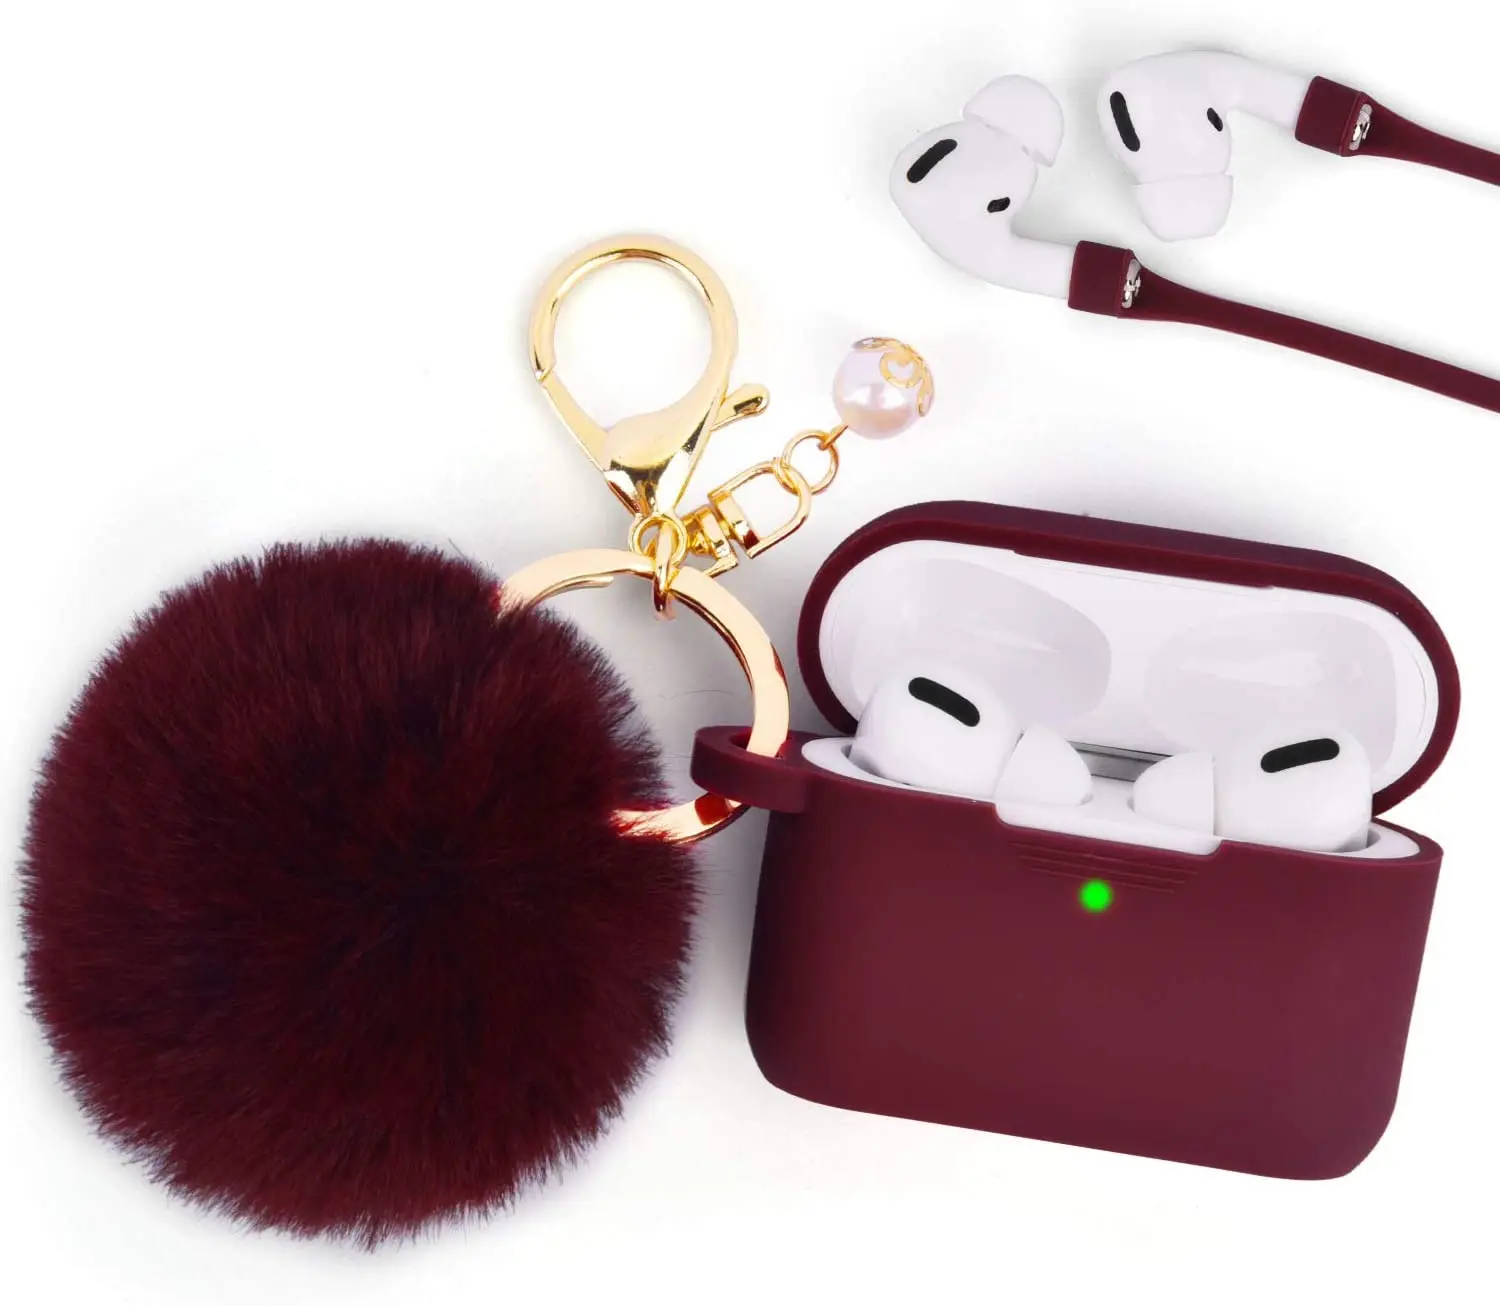 

2020 Charm Luxury Cute Silicone Cover Case for Airpod Pro Case with Fluffy Pompom Fur Ball Keychain Strap for Apple Airpod 3, 32 colors available, it could be customized with pantone number